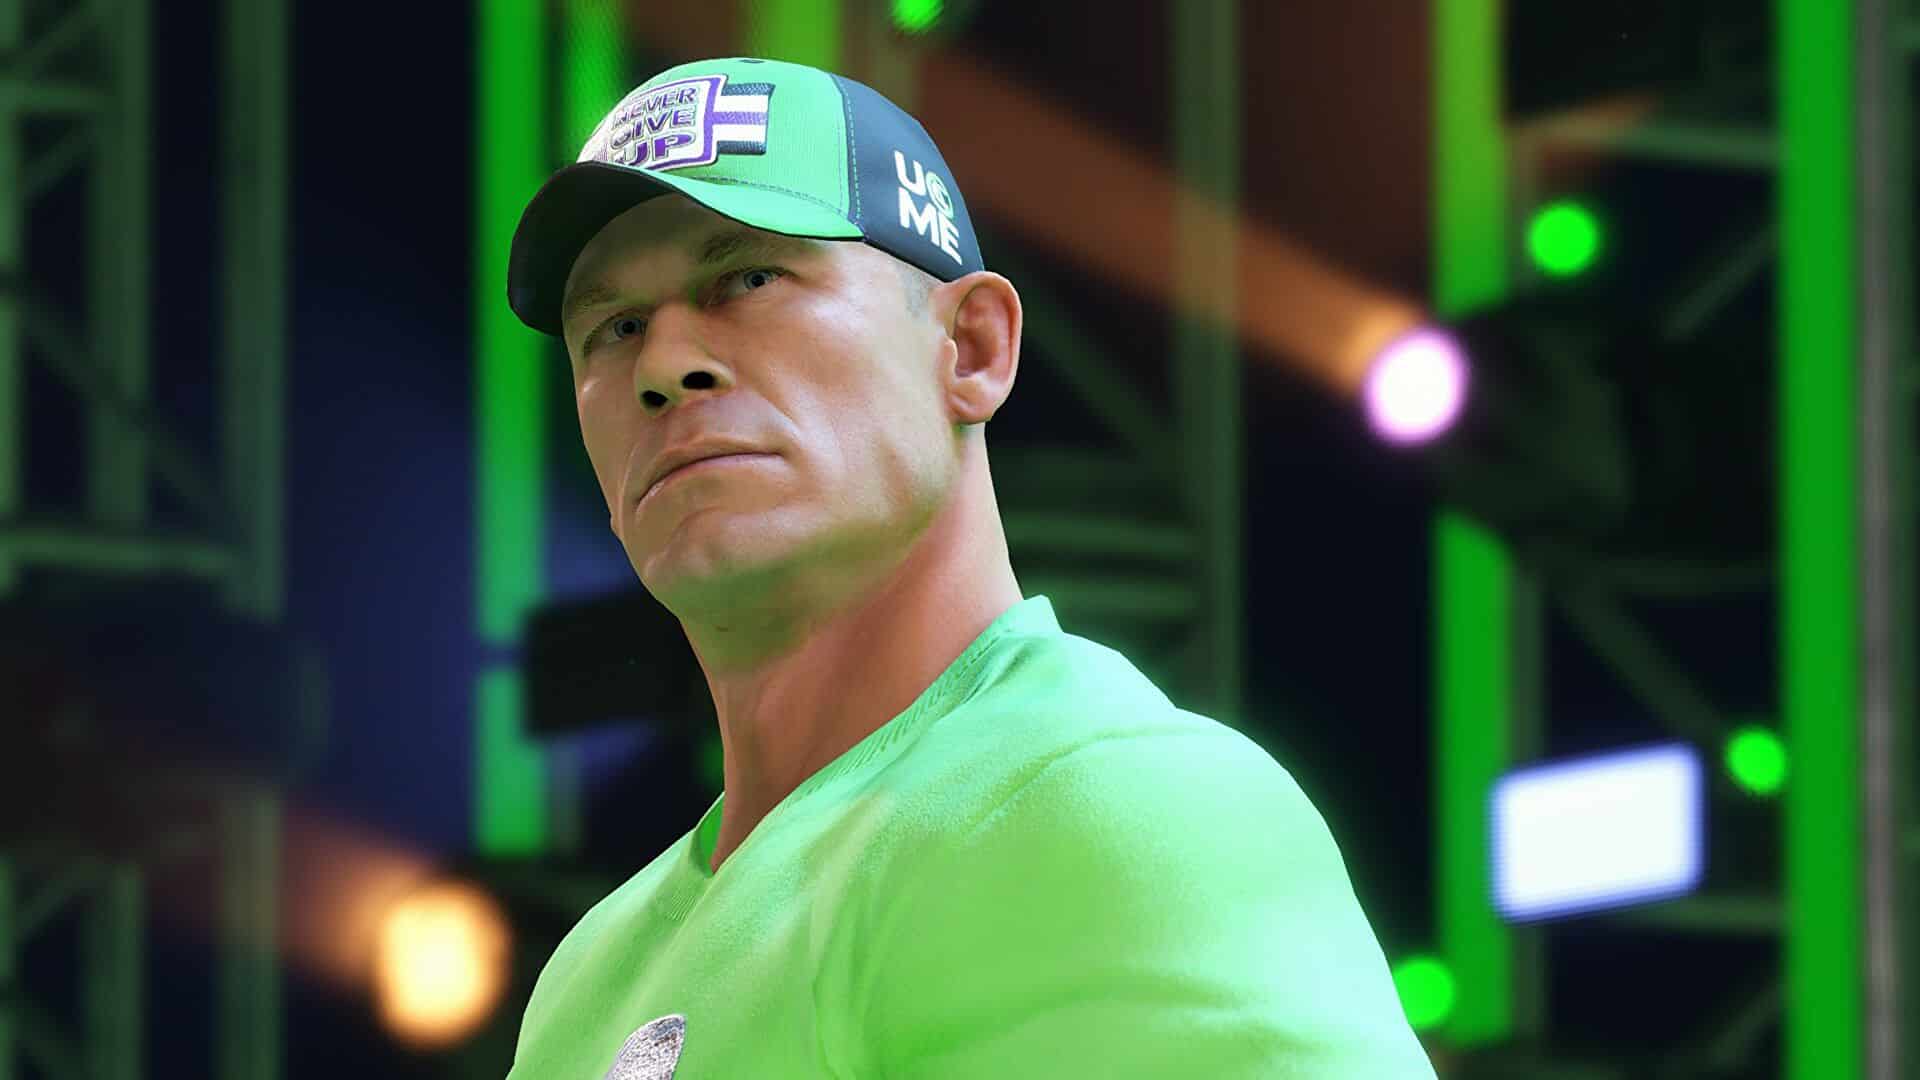 2K have removed four WWE games from Steam